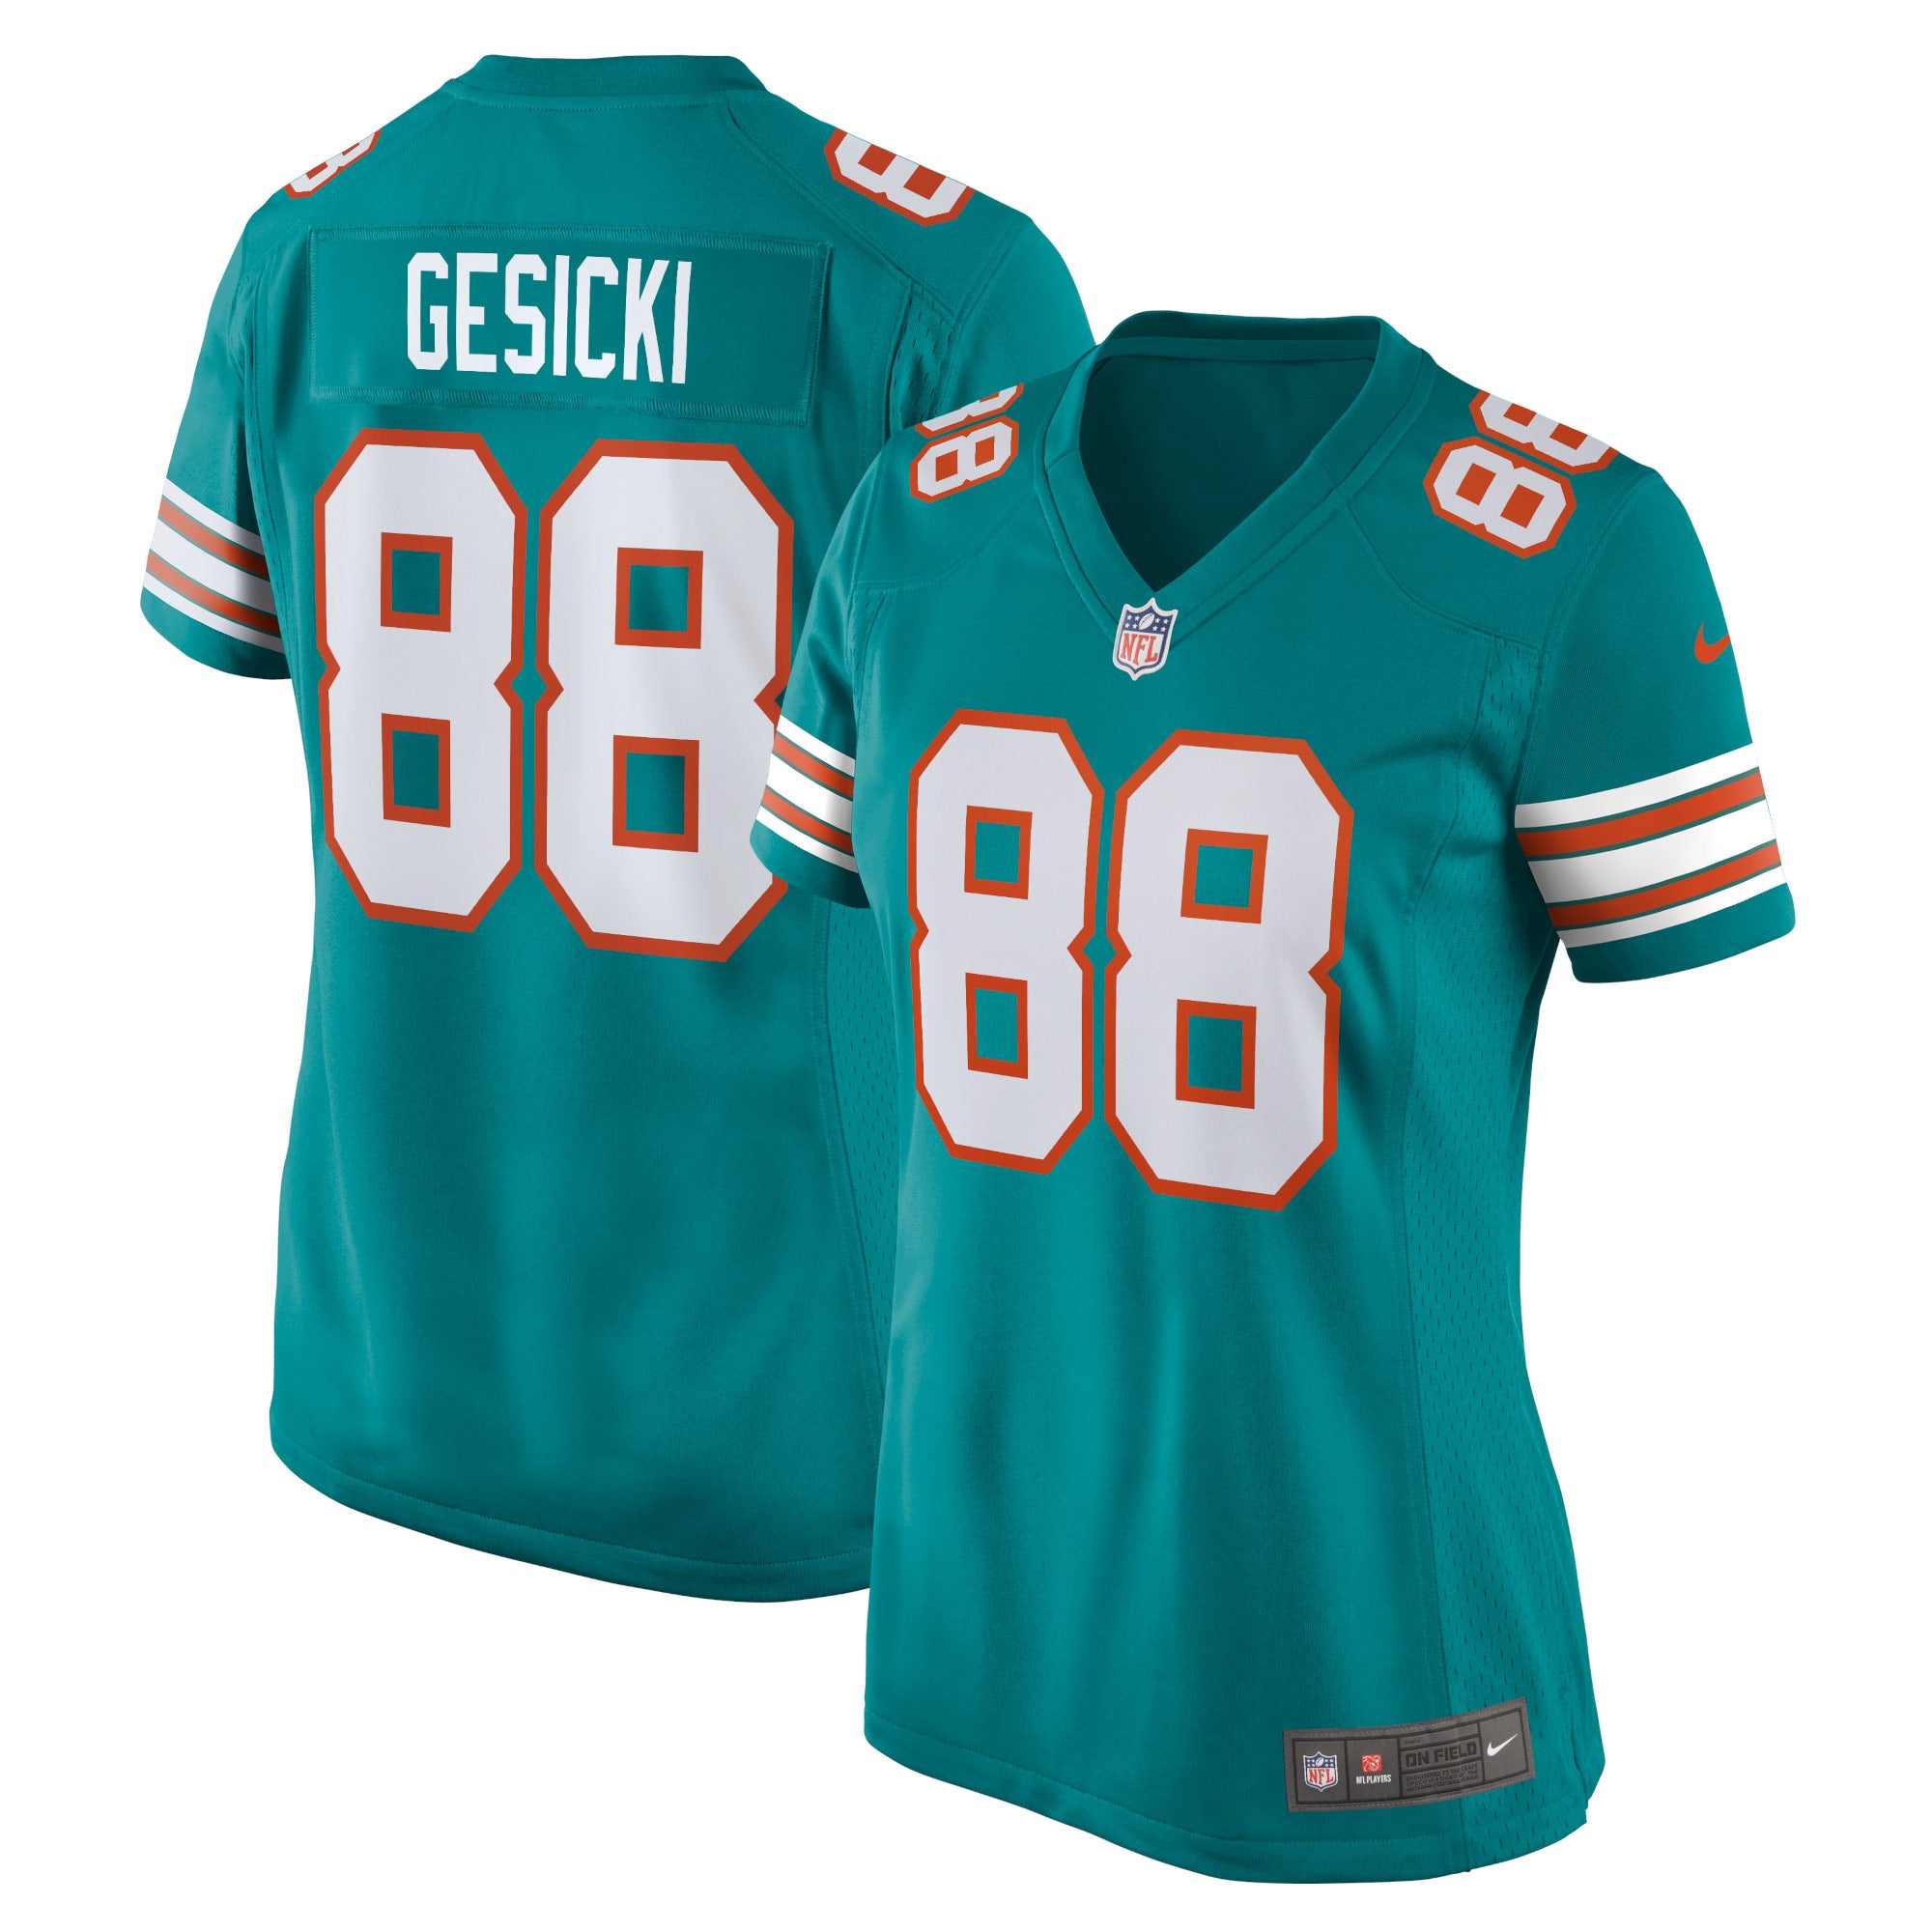 Nike Dolphins Game Jersey - Women's